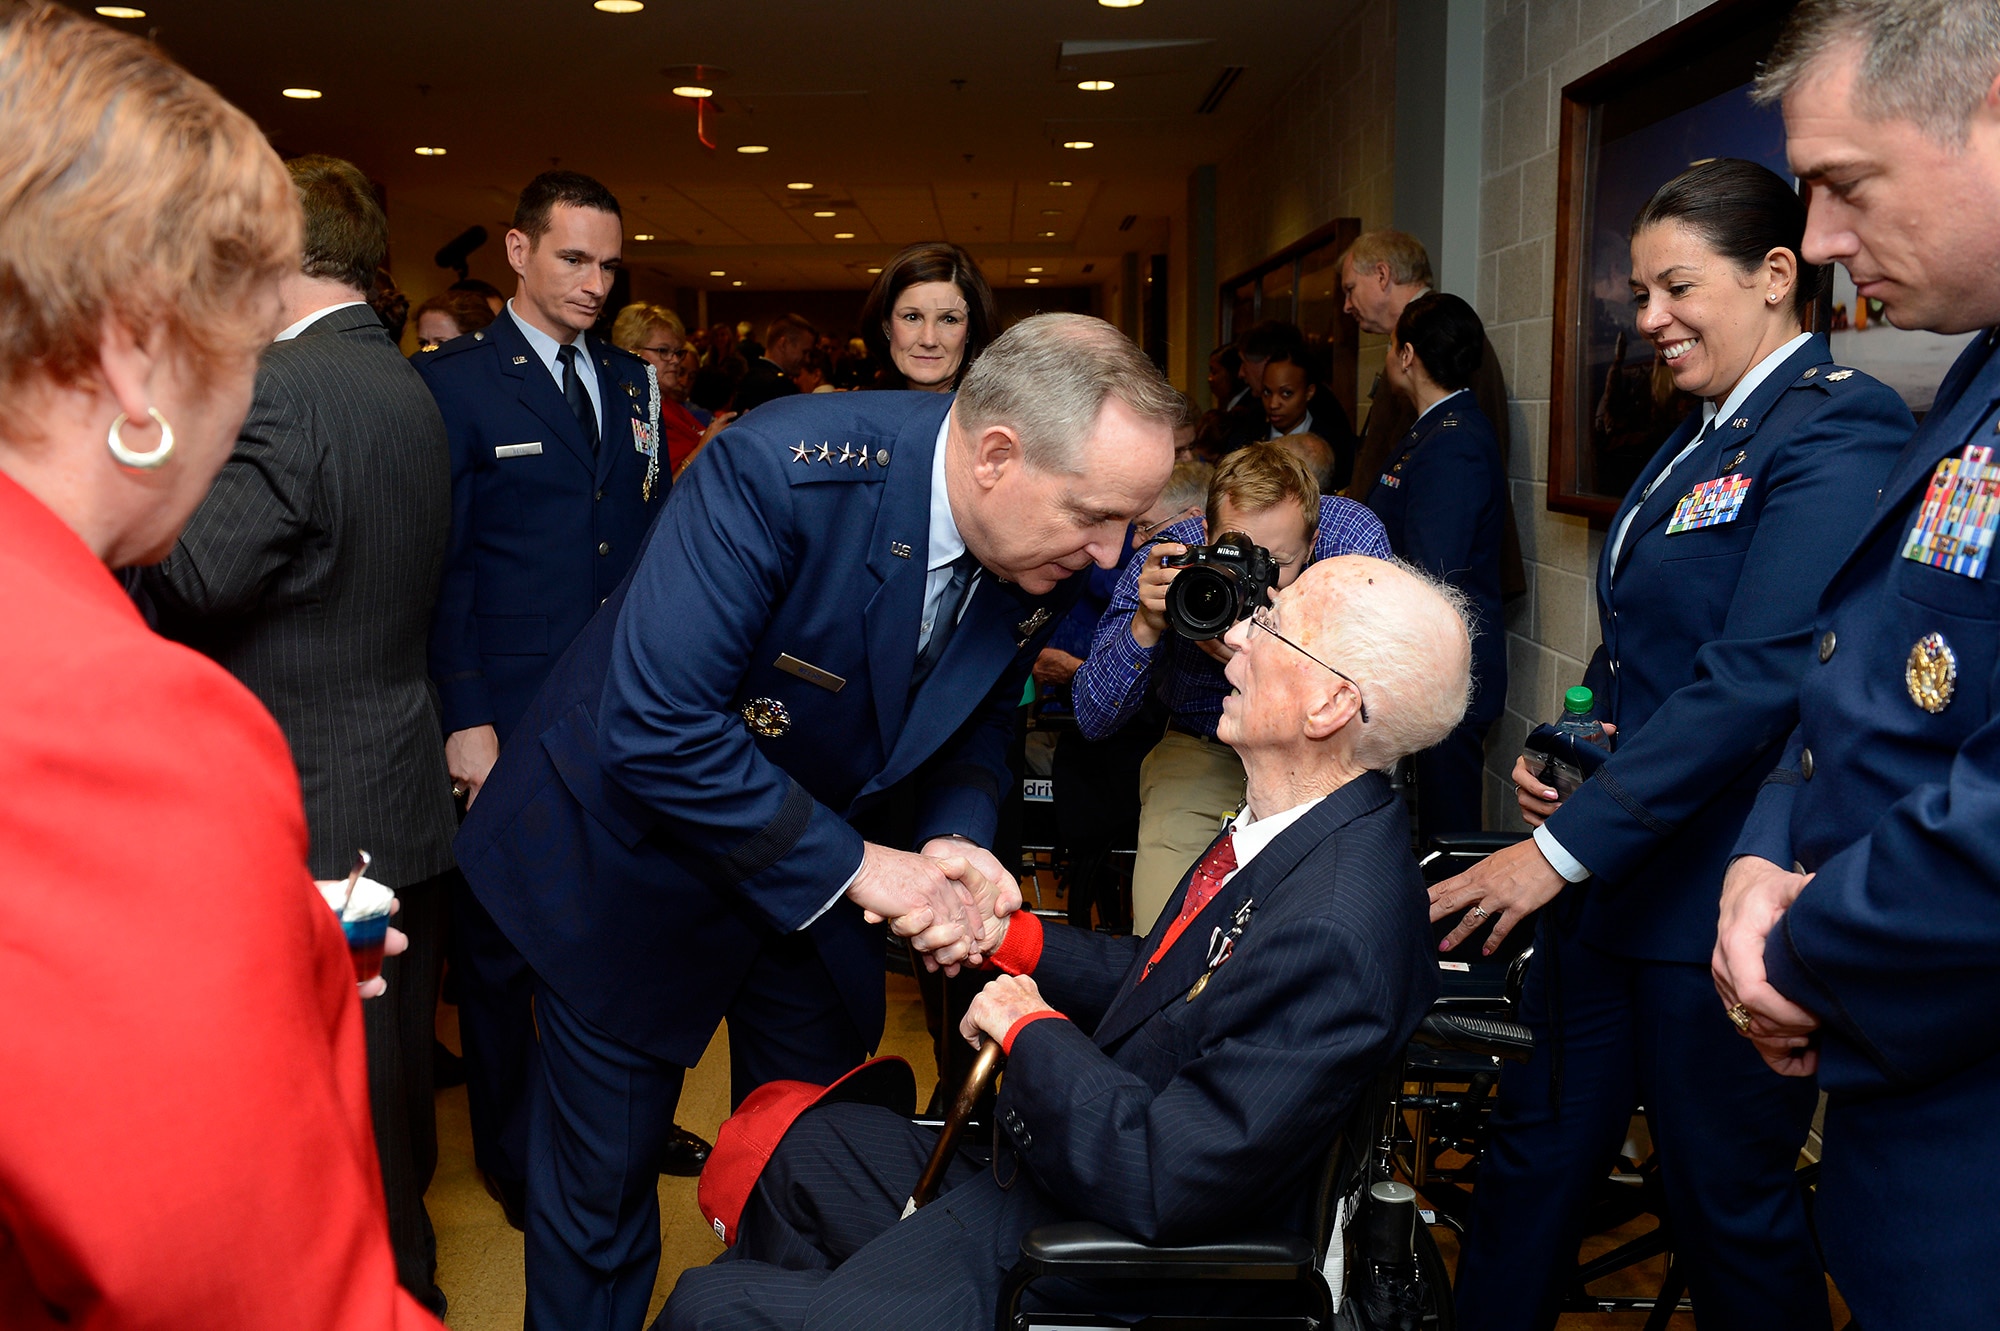 First Lt. James Mahon (seated) is congratulated by Air Force Chief of Staff Gen. Mark A. Welsh III after he received the Prisoner of War Medal April 30, 2014, during a ceremony at the Pentagon. Mahon was held in a prison camp in Wauwilermoos, Switzerland, after being shot down during a mission over Germany. (U.S. Air Force photo/Scott M. Ash)           